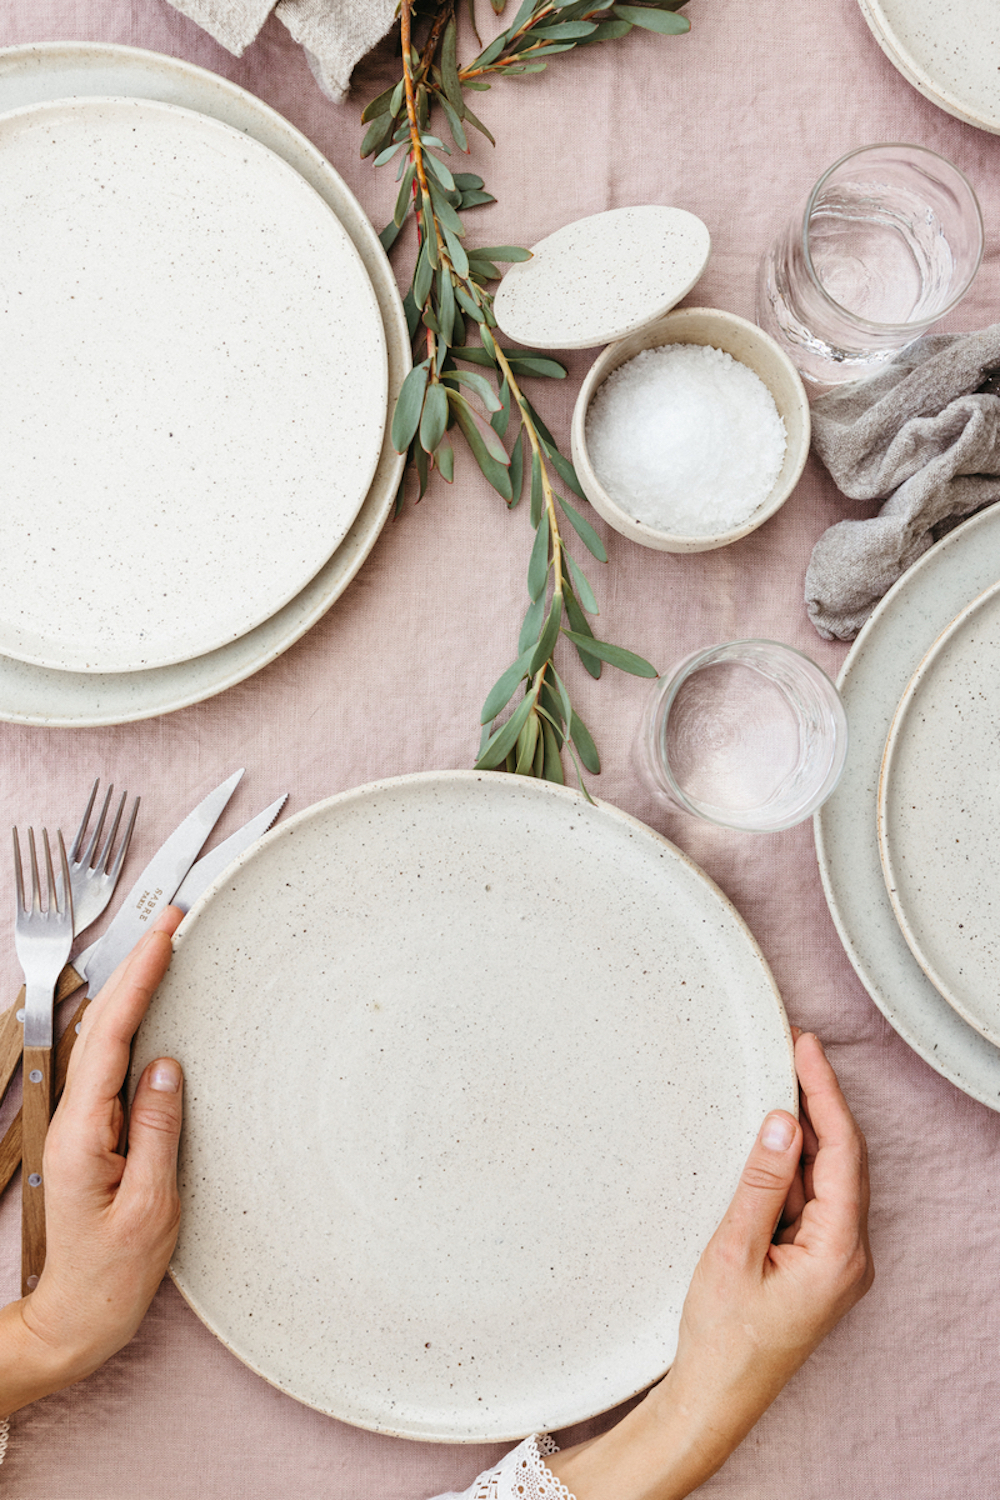 Hands setting down speckled stoneware plate on pink tablecloth with other neutral plates, salt cellar, glassware, and flatware.